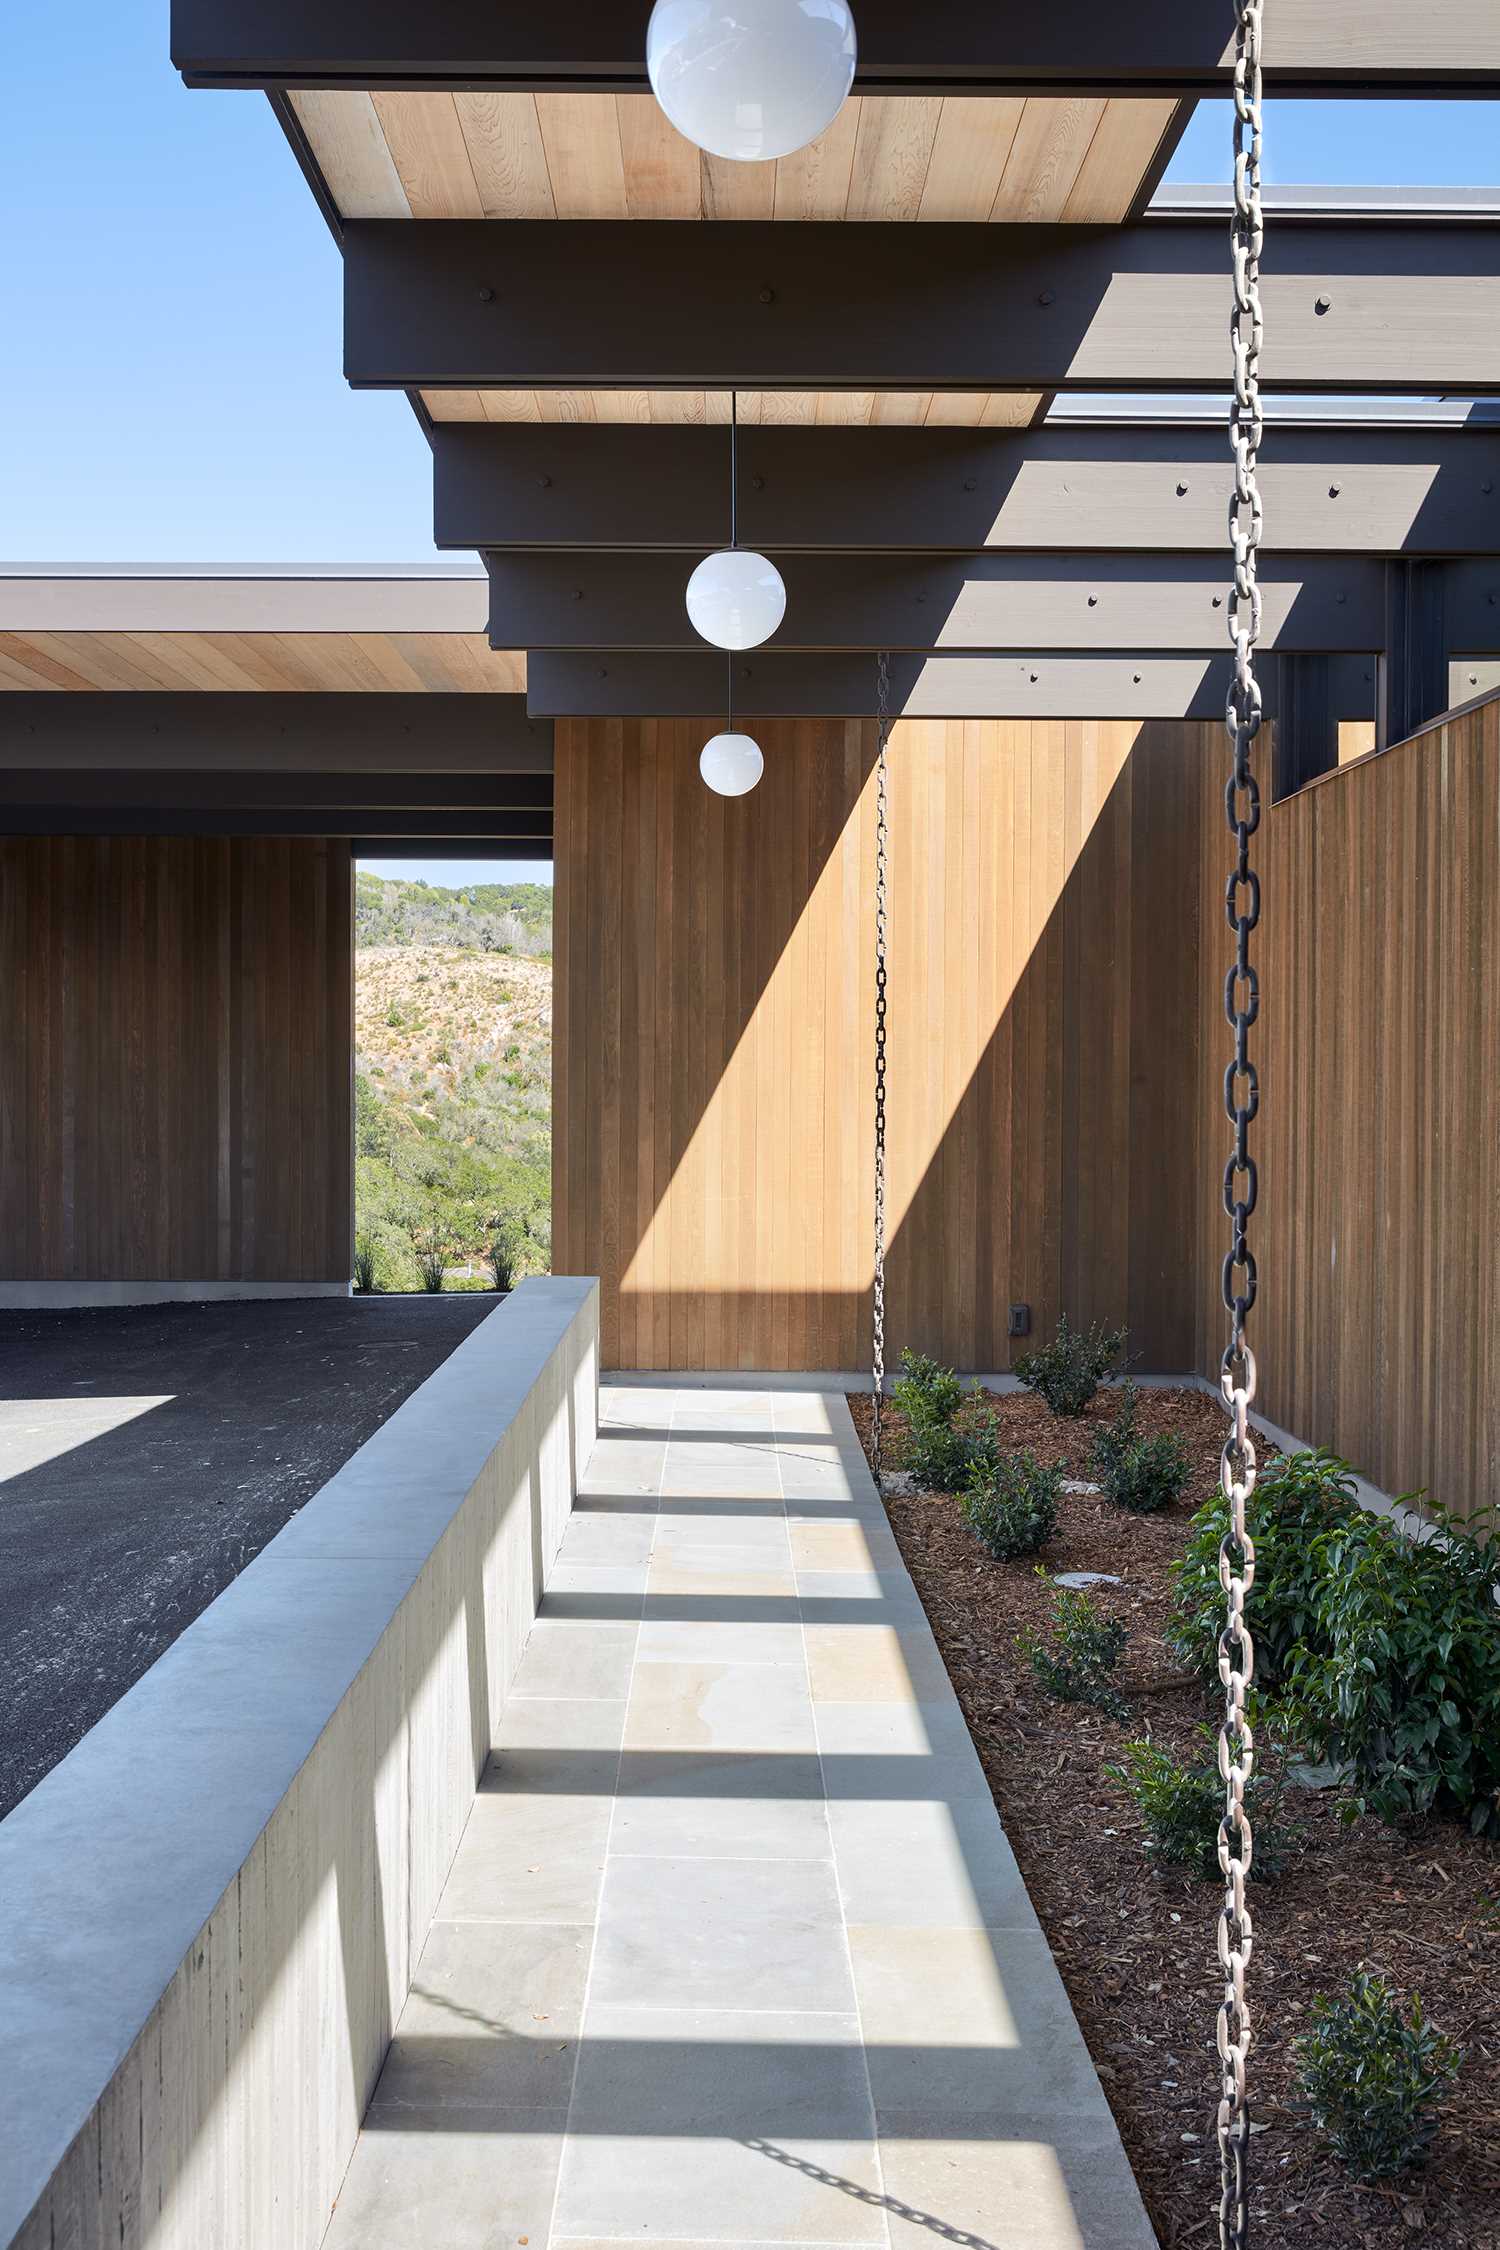 A mid-century modern inspired house includes rain chains in its design.